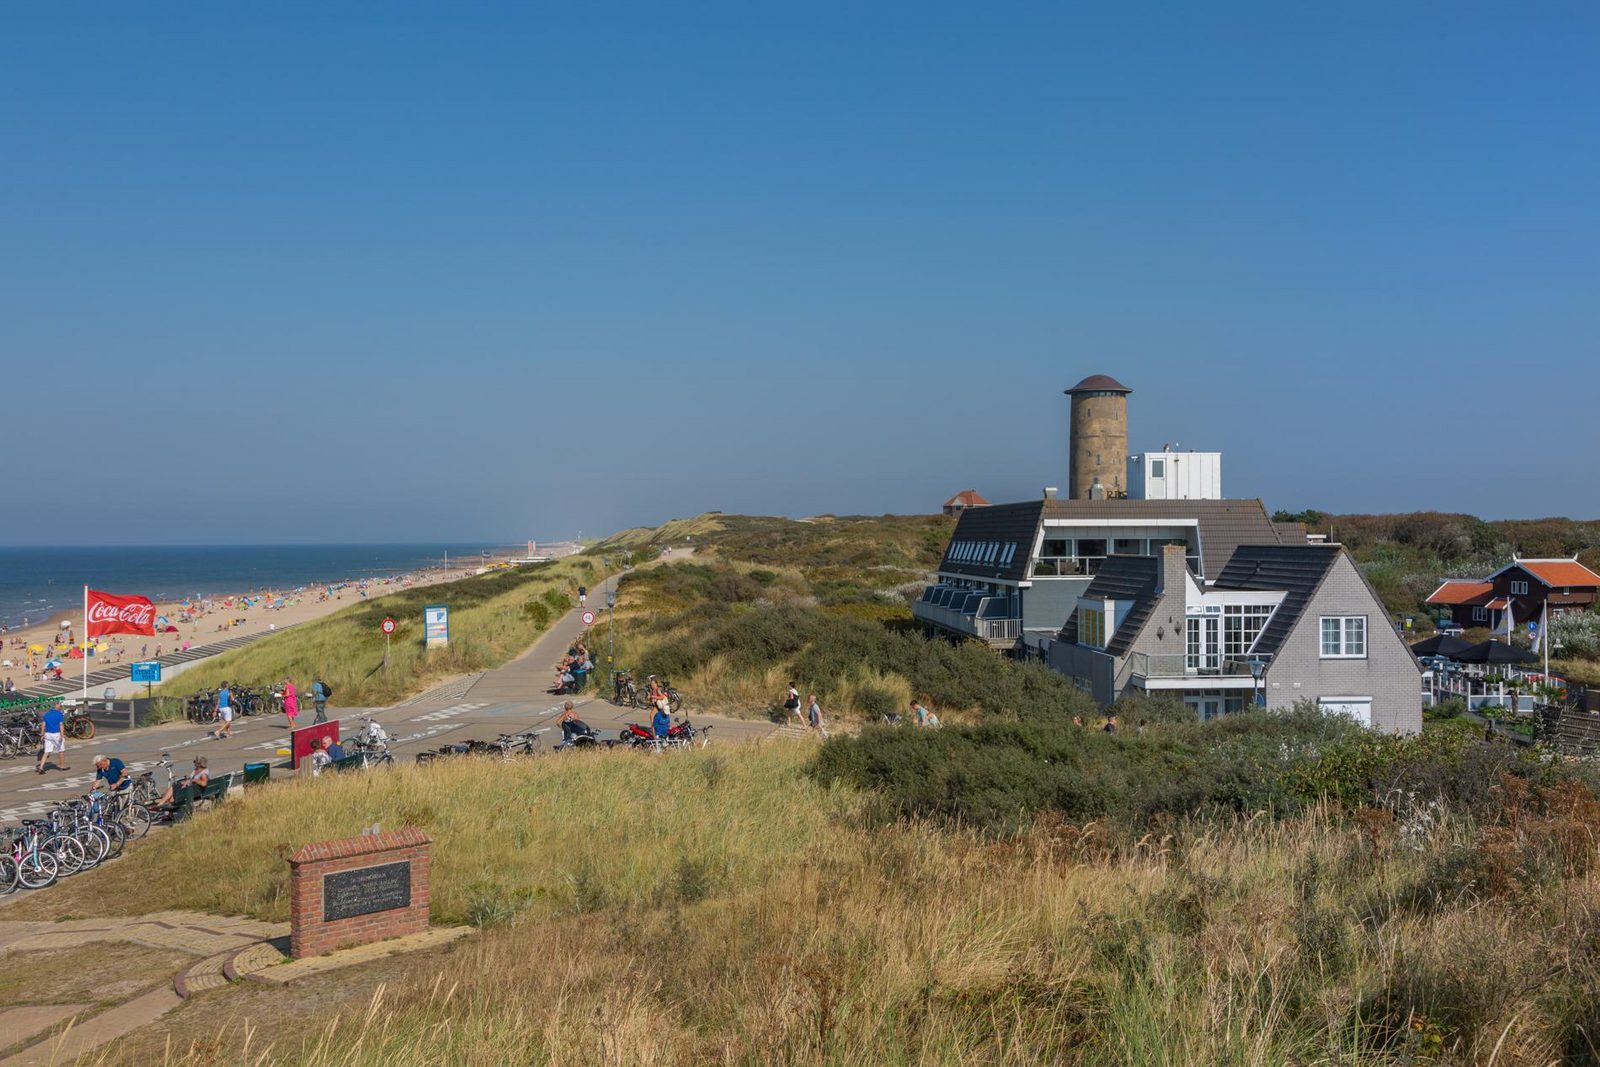 Luxe holidayhome - Kanonweistraat 11a | Domburg  